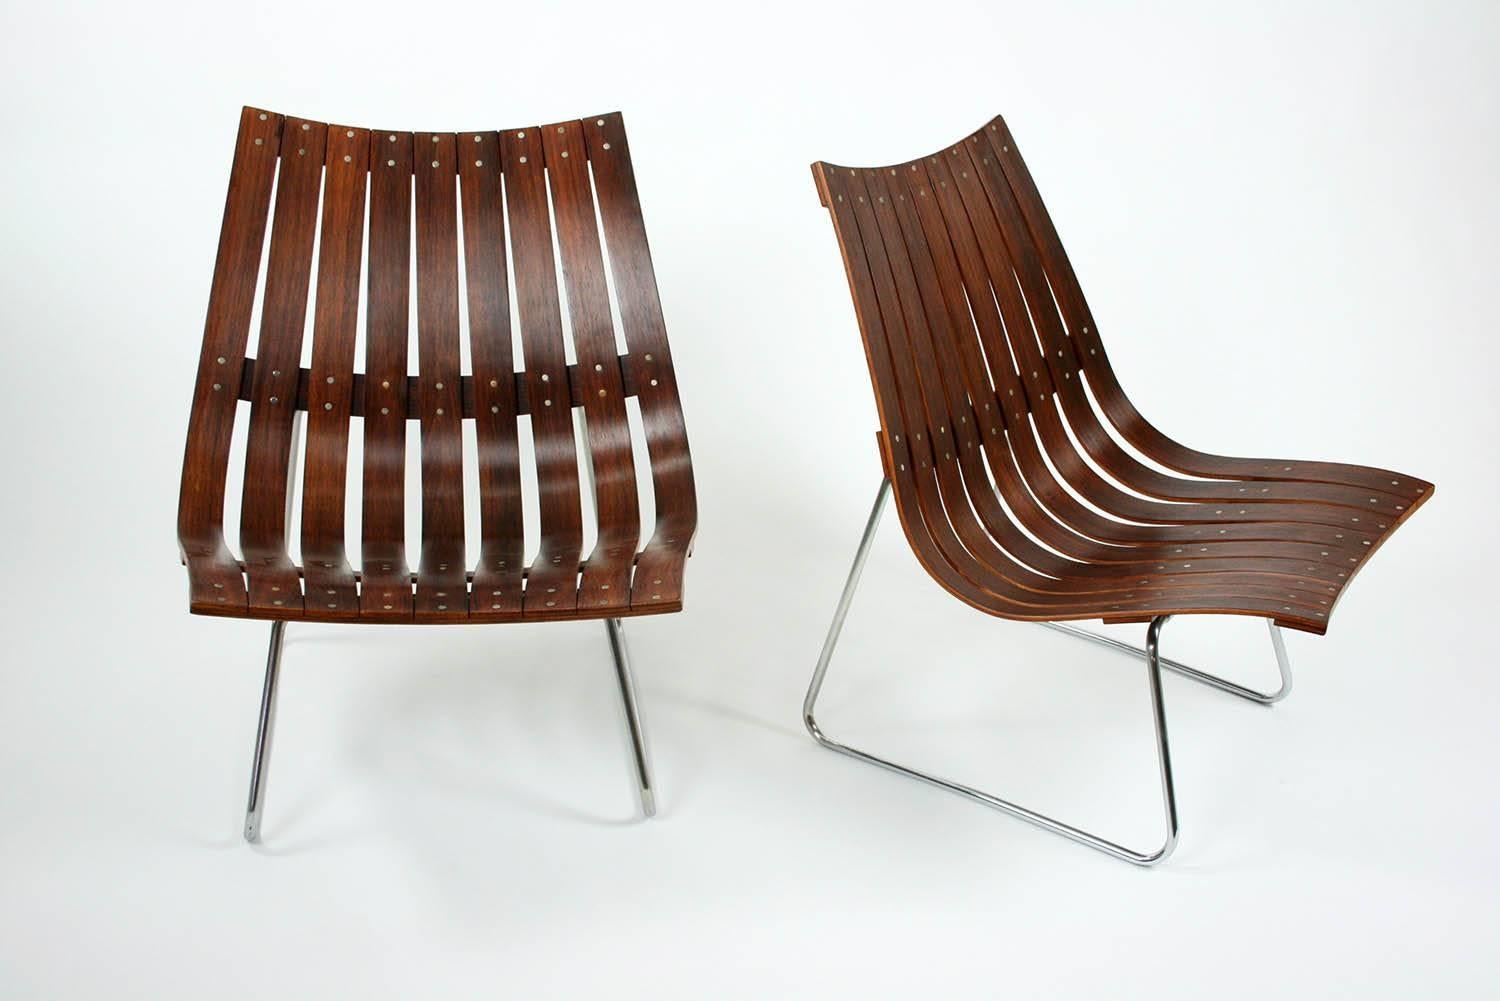 Pair of Kjell Richardsen Tynes möbelfabrik rosewood lounge chairs circa 1960. The shape and ingenious construction makes this a timeless piece. These have been completely restored to their original state. The rosewood is again bright and the chrome